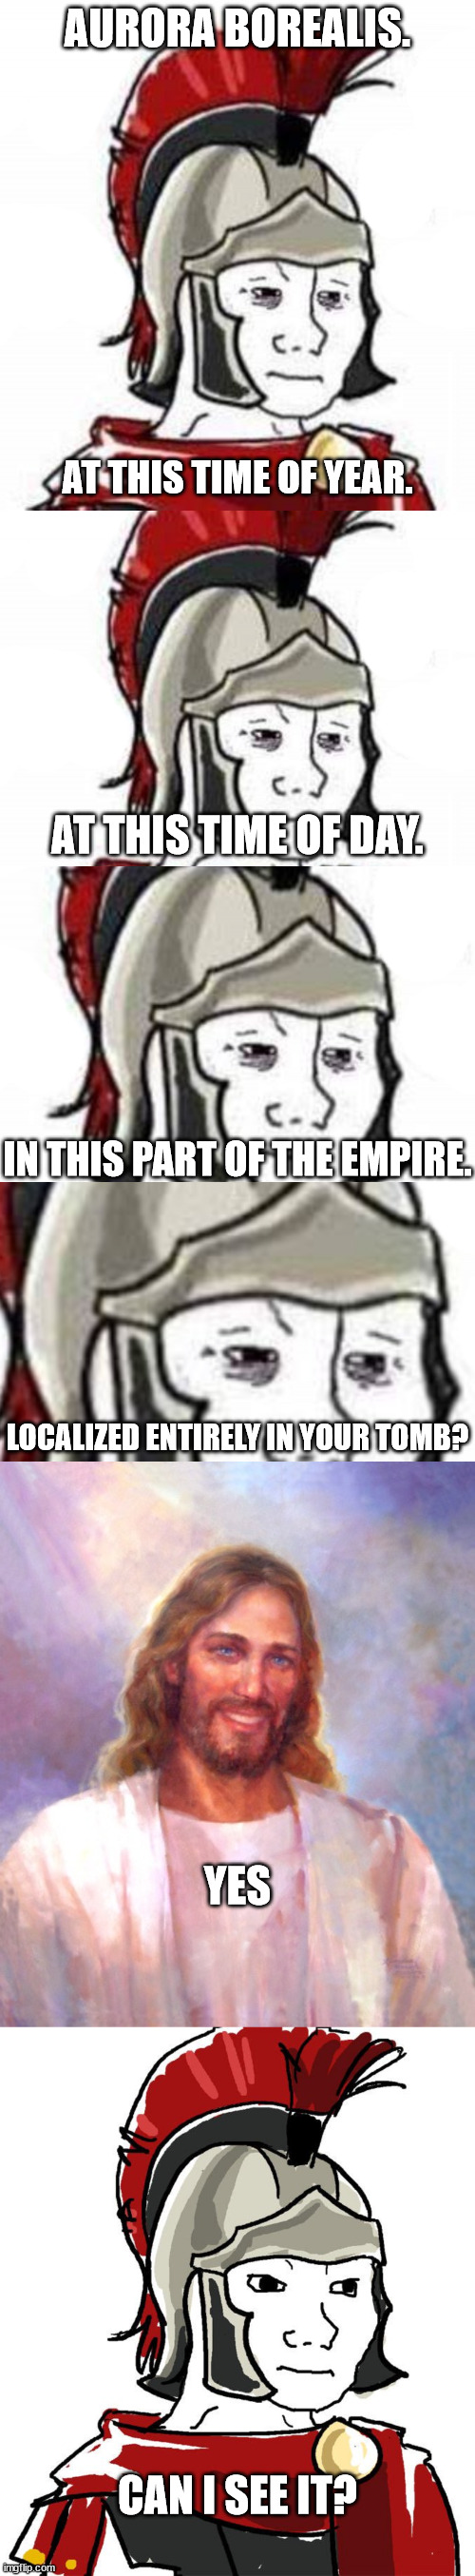 AURORA BOREALIS. AT THIS TIME OF YEAR. AT THIS TIME OF DAY. IN THIS PART OF THE EMPIRE. LOCALIZED ENTIRELY IN YOUR TOMB? YES; CAN I SEE IT? | image tagged in roman doomer,memes,smiling jesus,roman soldier meme wojak,easter,happy easter | made w/ Imgflip meme maker